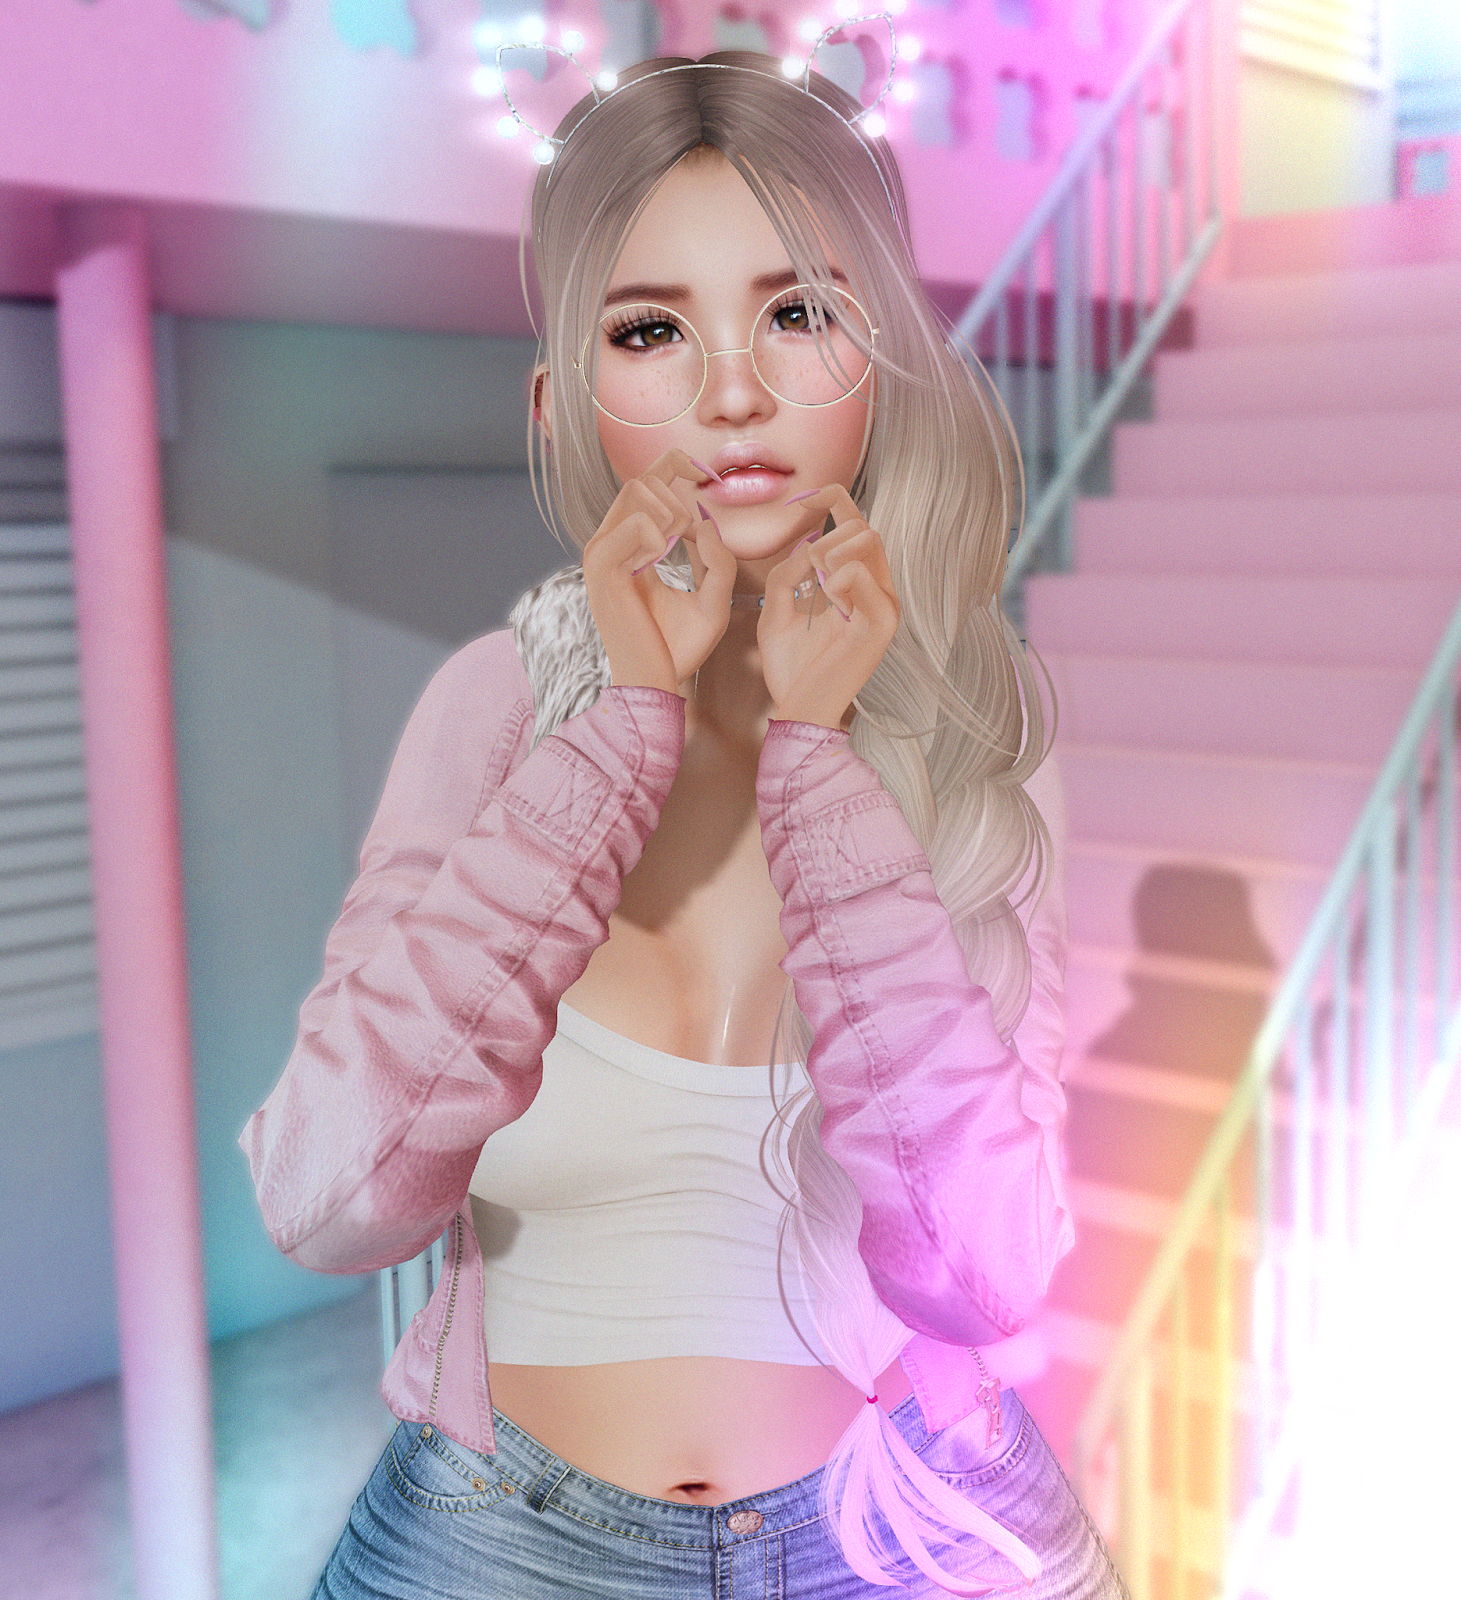 93♥ ♥cats Eyes And Thighs♥ { Pixel Fashion }